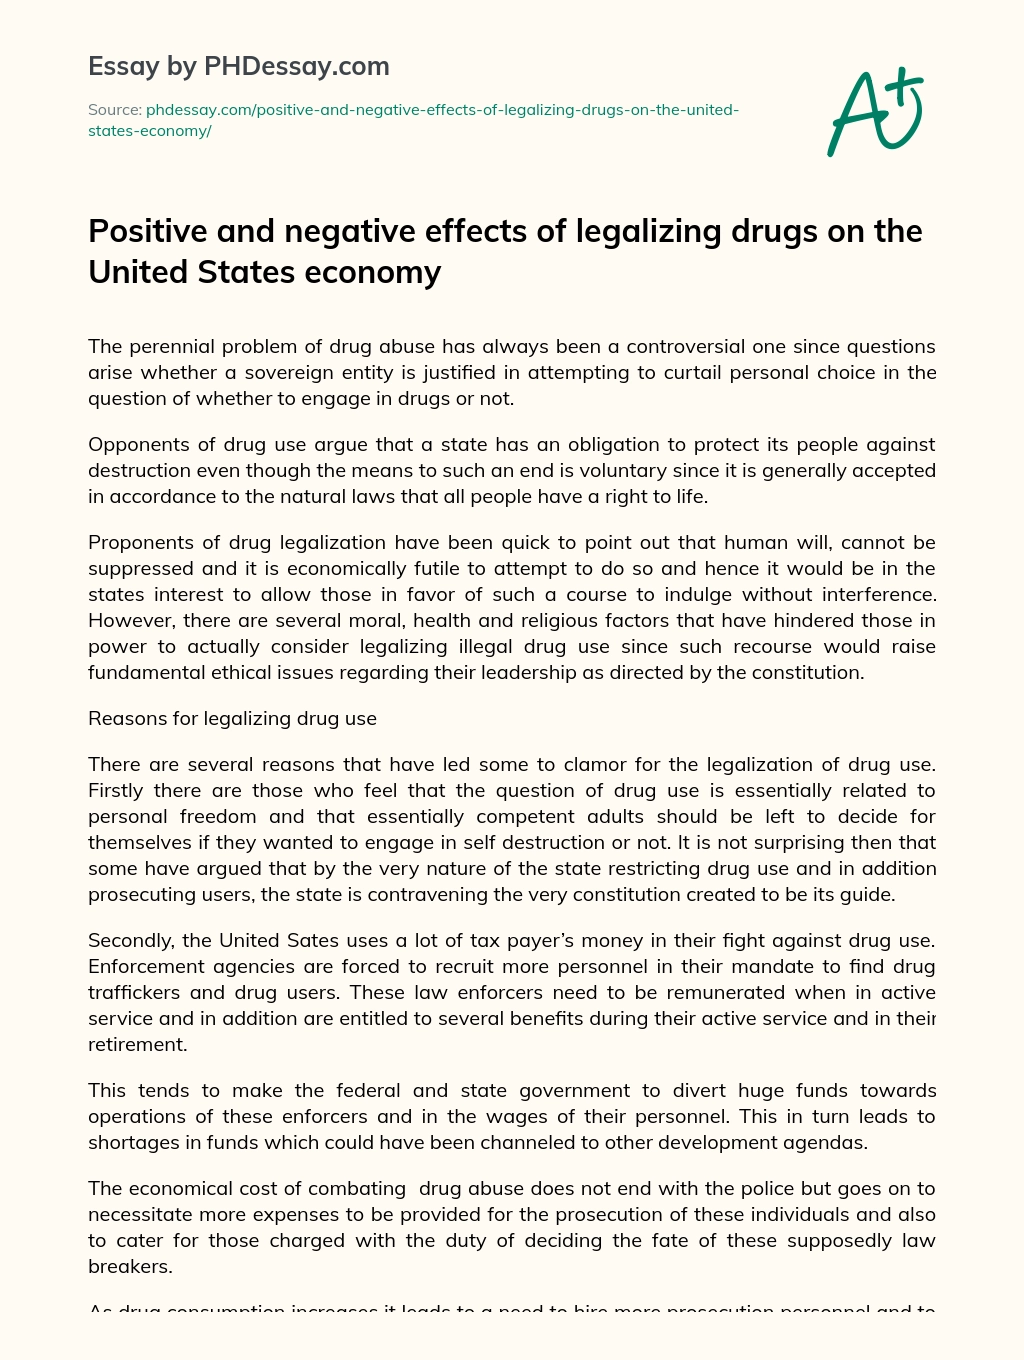 Positive and negative effects of legalizing drugs on the United States economy essay